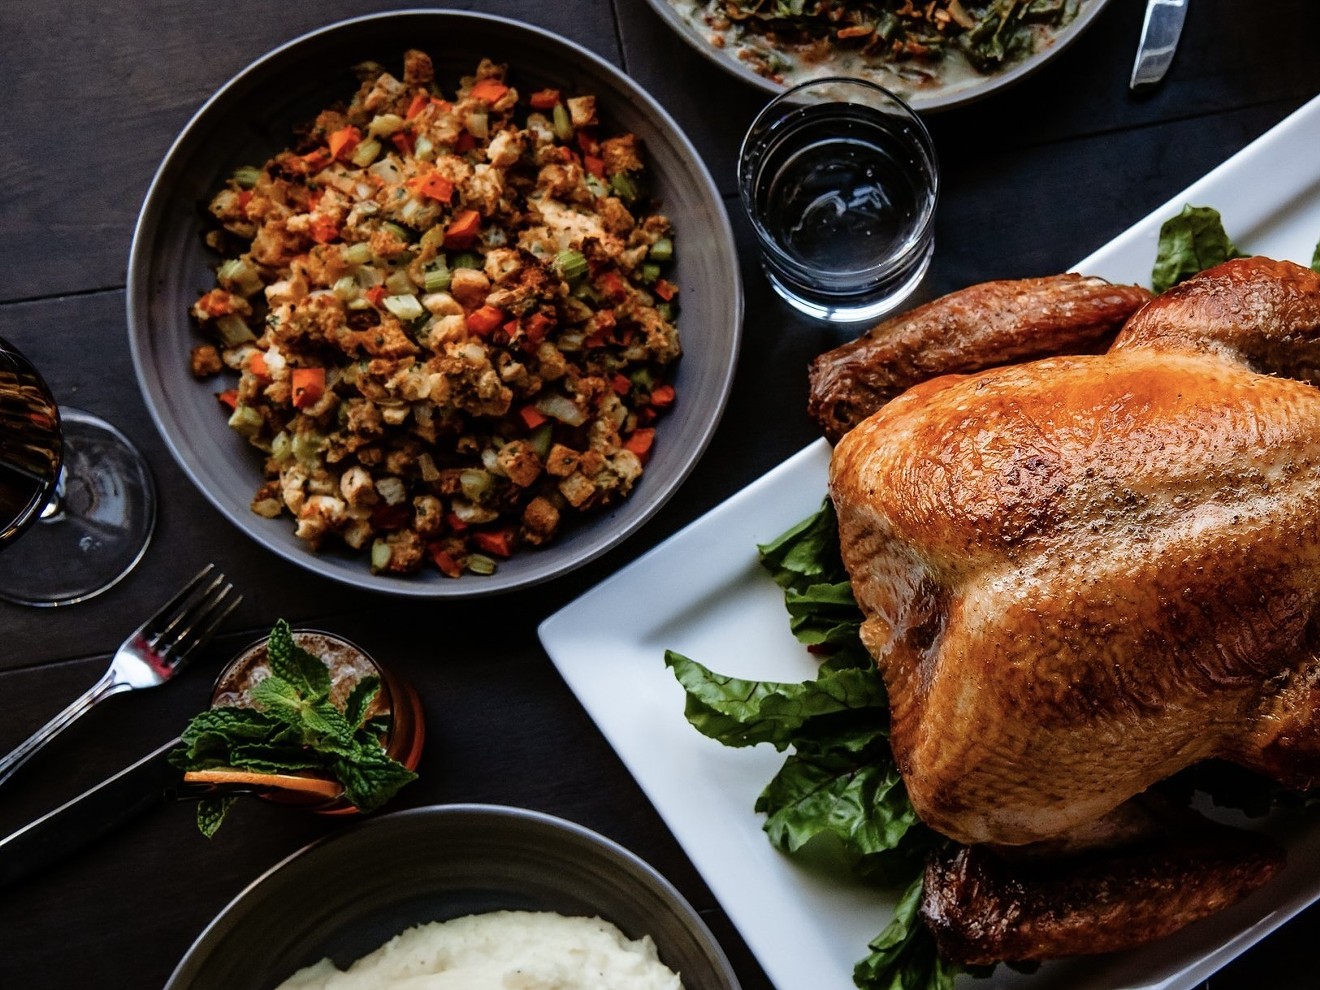 Thanksgiving to-go: Where to pre-order turkey dinner with sides